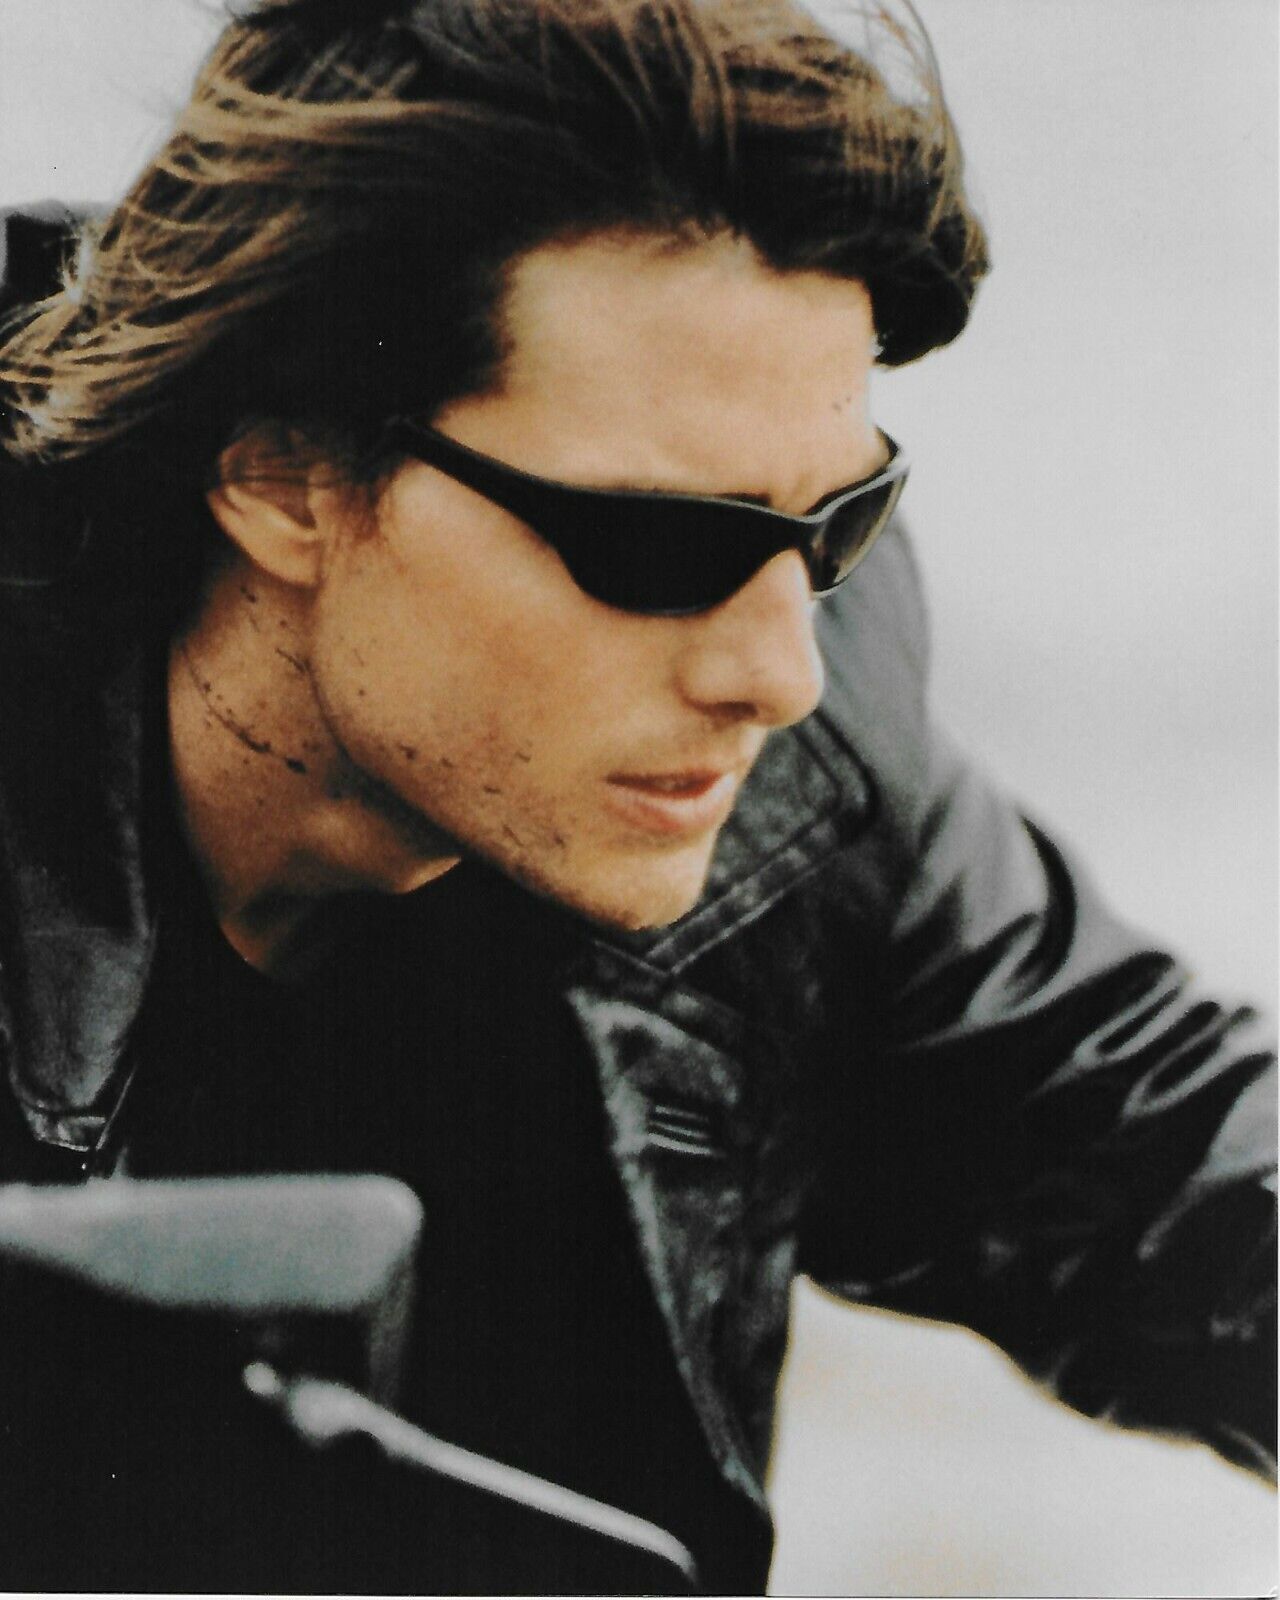 Amazing Mission Impossible 2 Photo with Tom Cruise